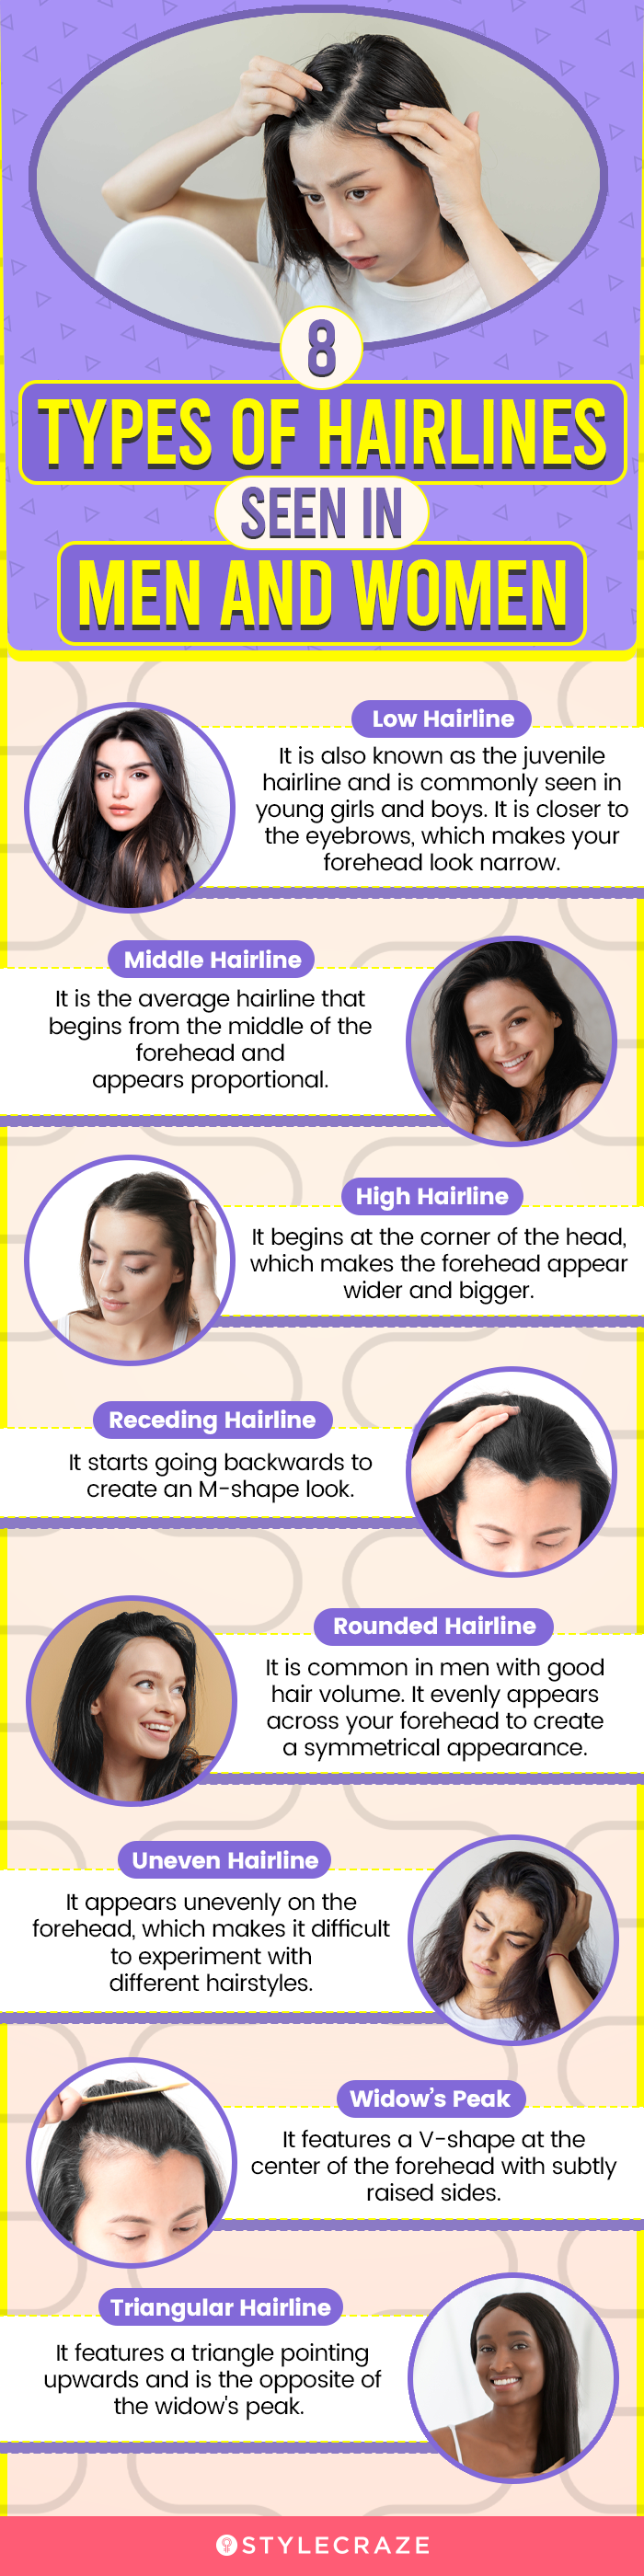 8 types of hairlines seen in men and women (infographic)